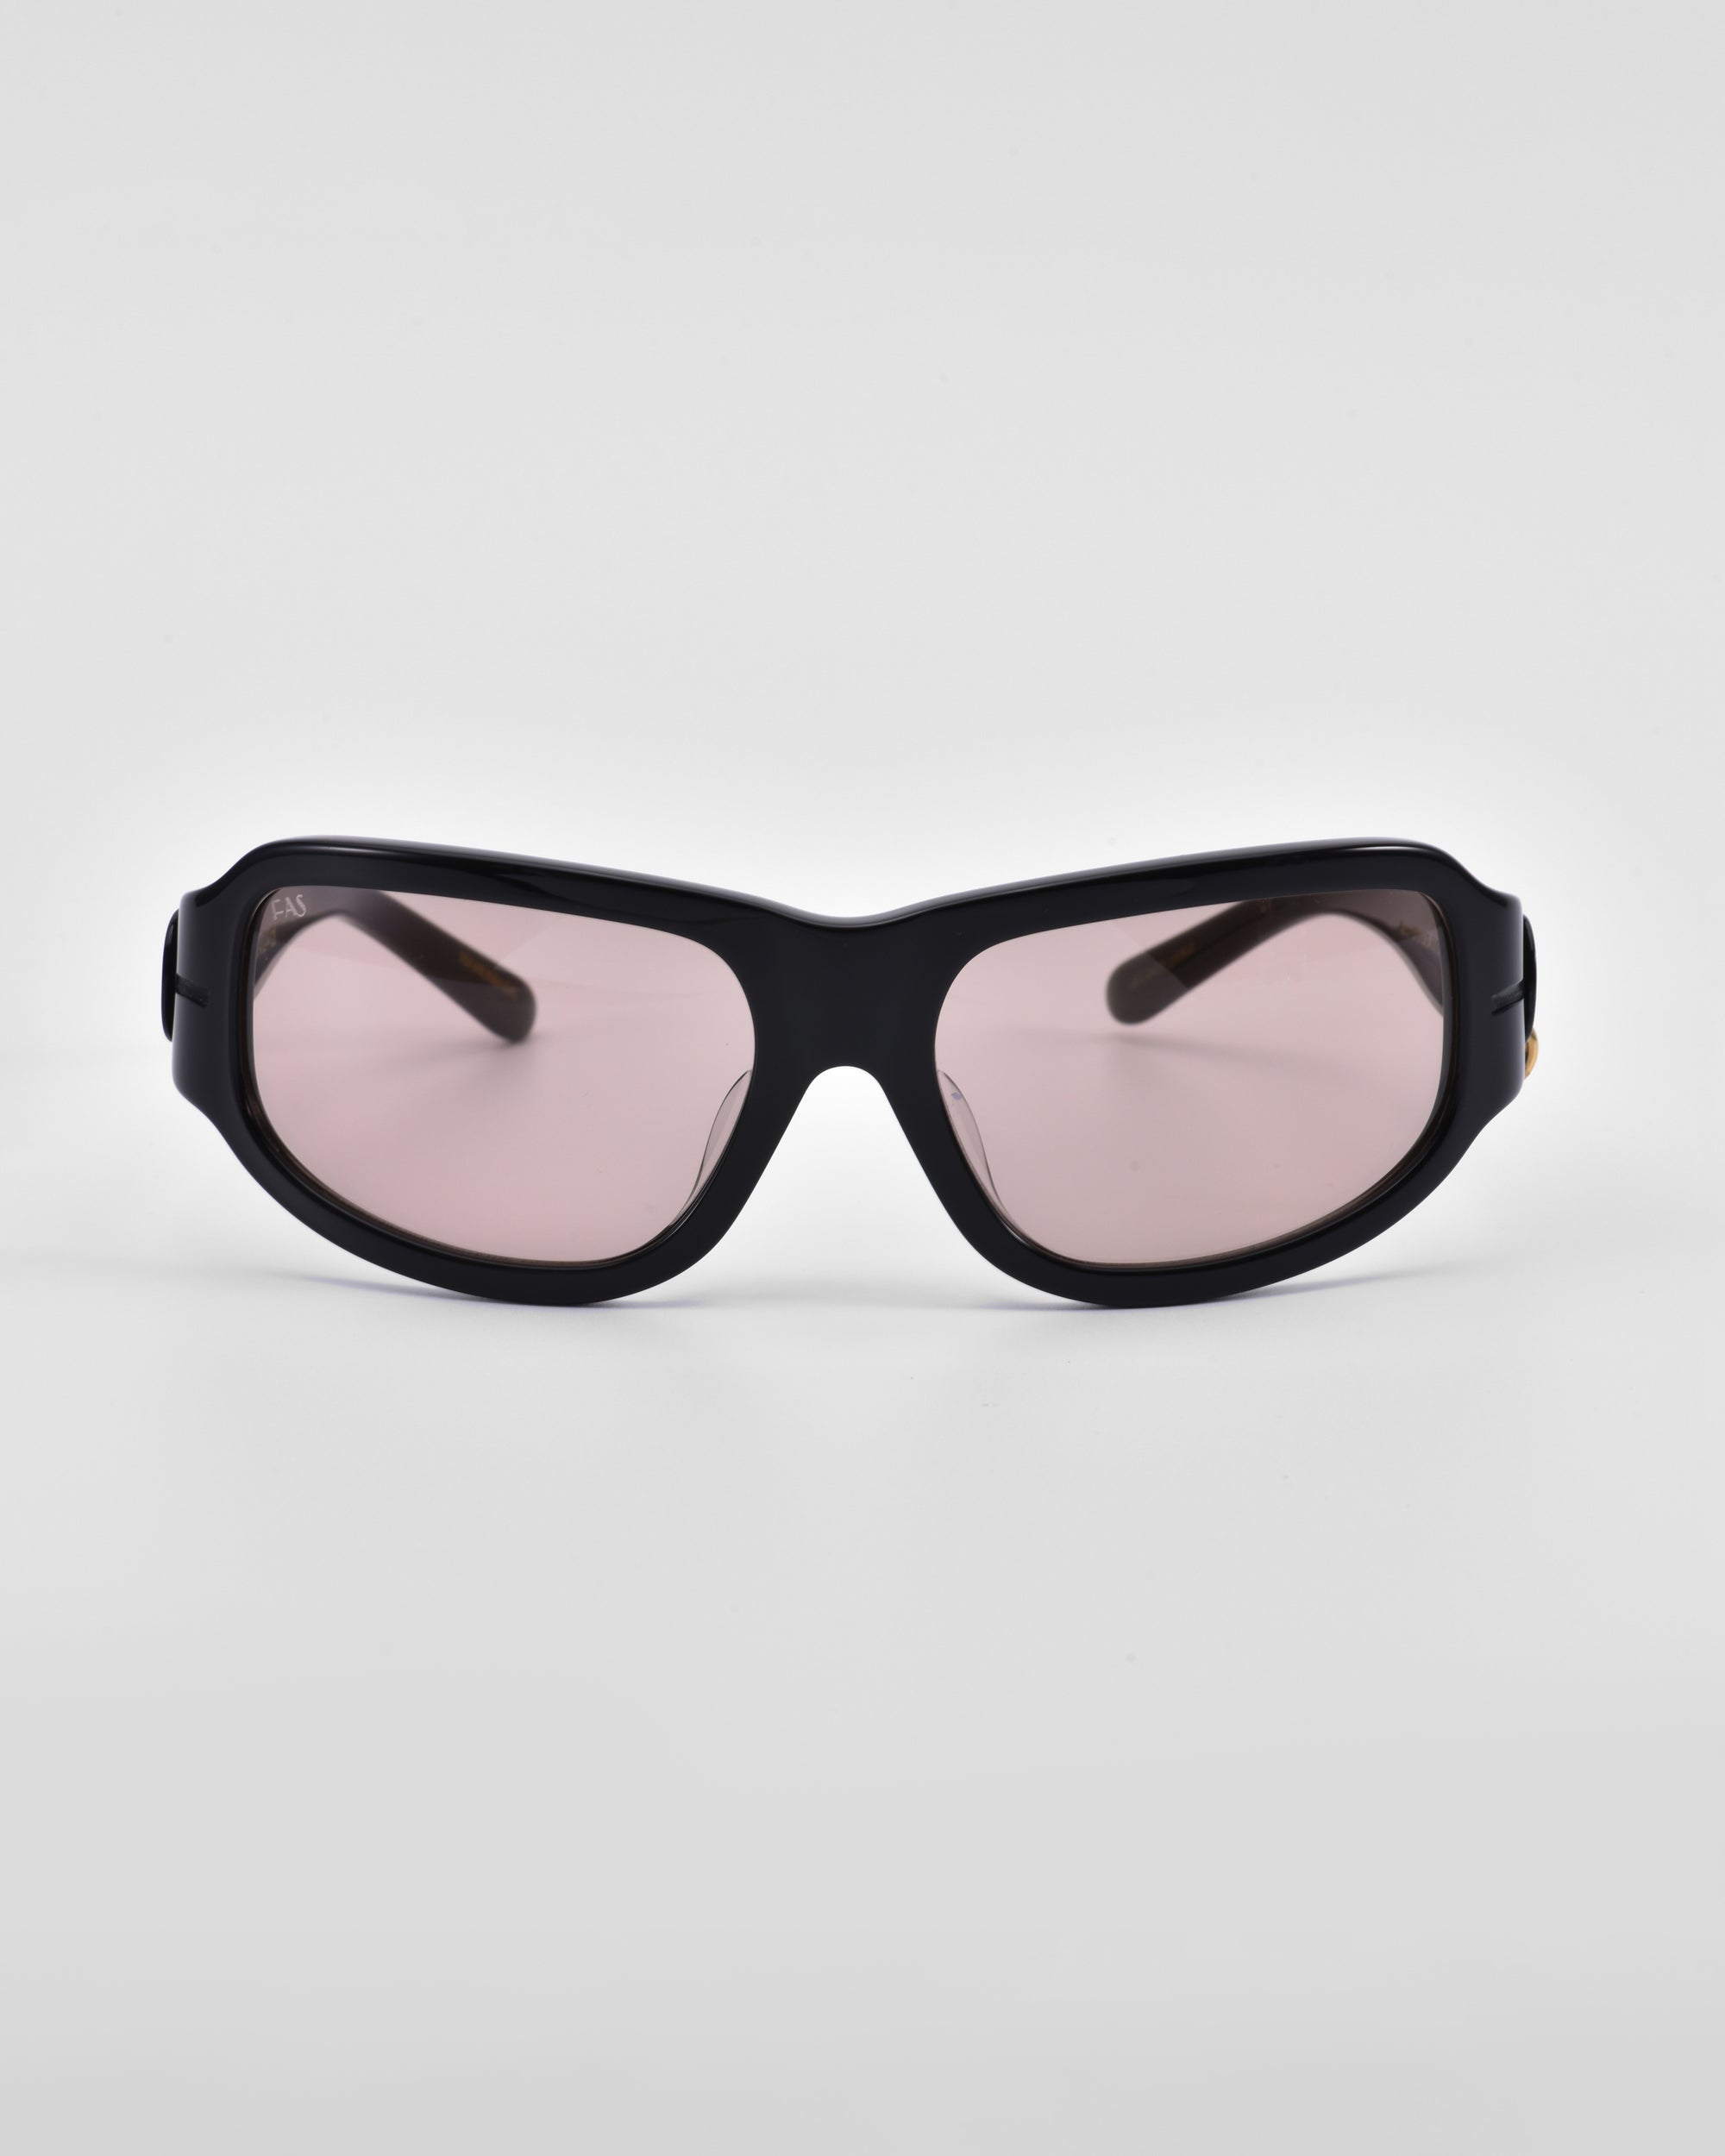 A pair of black-framed For Art&#39;s Sake® Raven sunglasses with tinted lenses is shown against a plain white background. The design features a sleek, angular shape with slightly rounded edges, and the lenses appear to have a subtle pinkish tint.